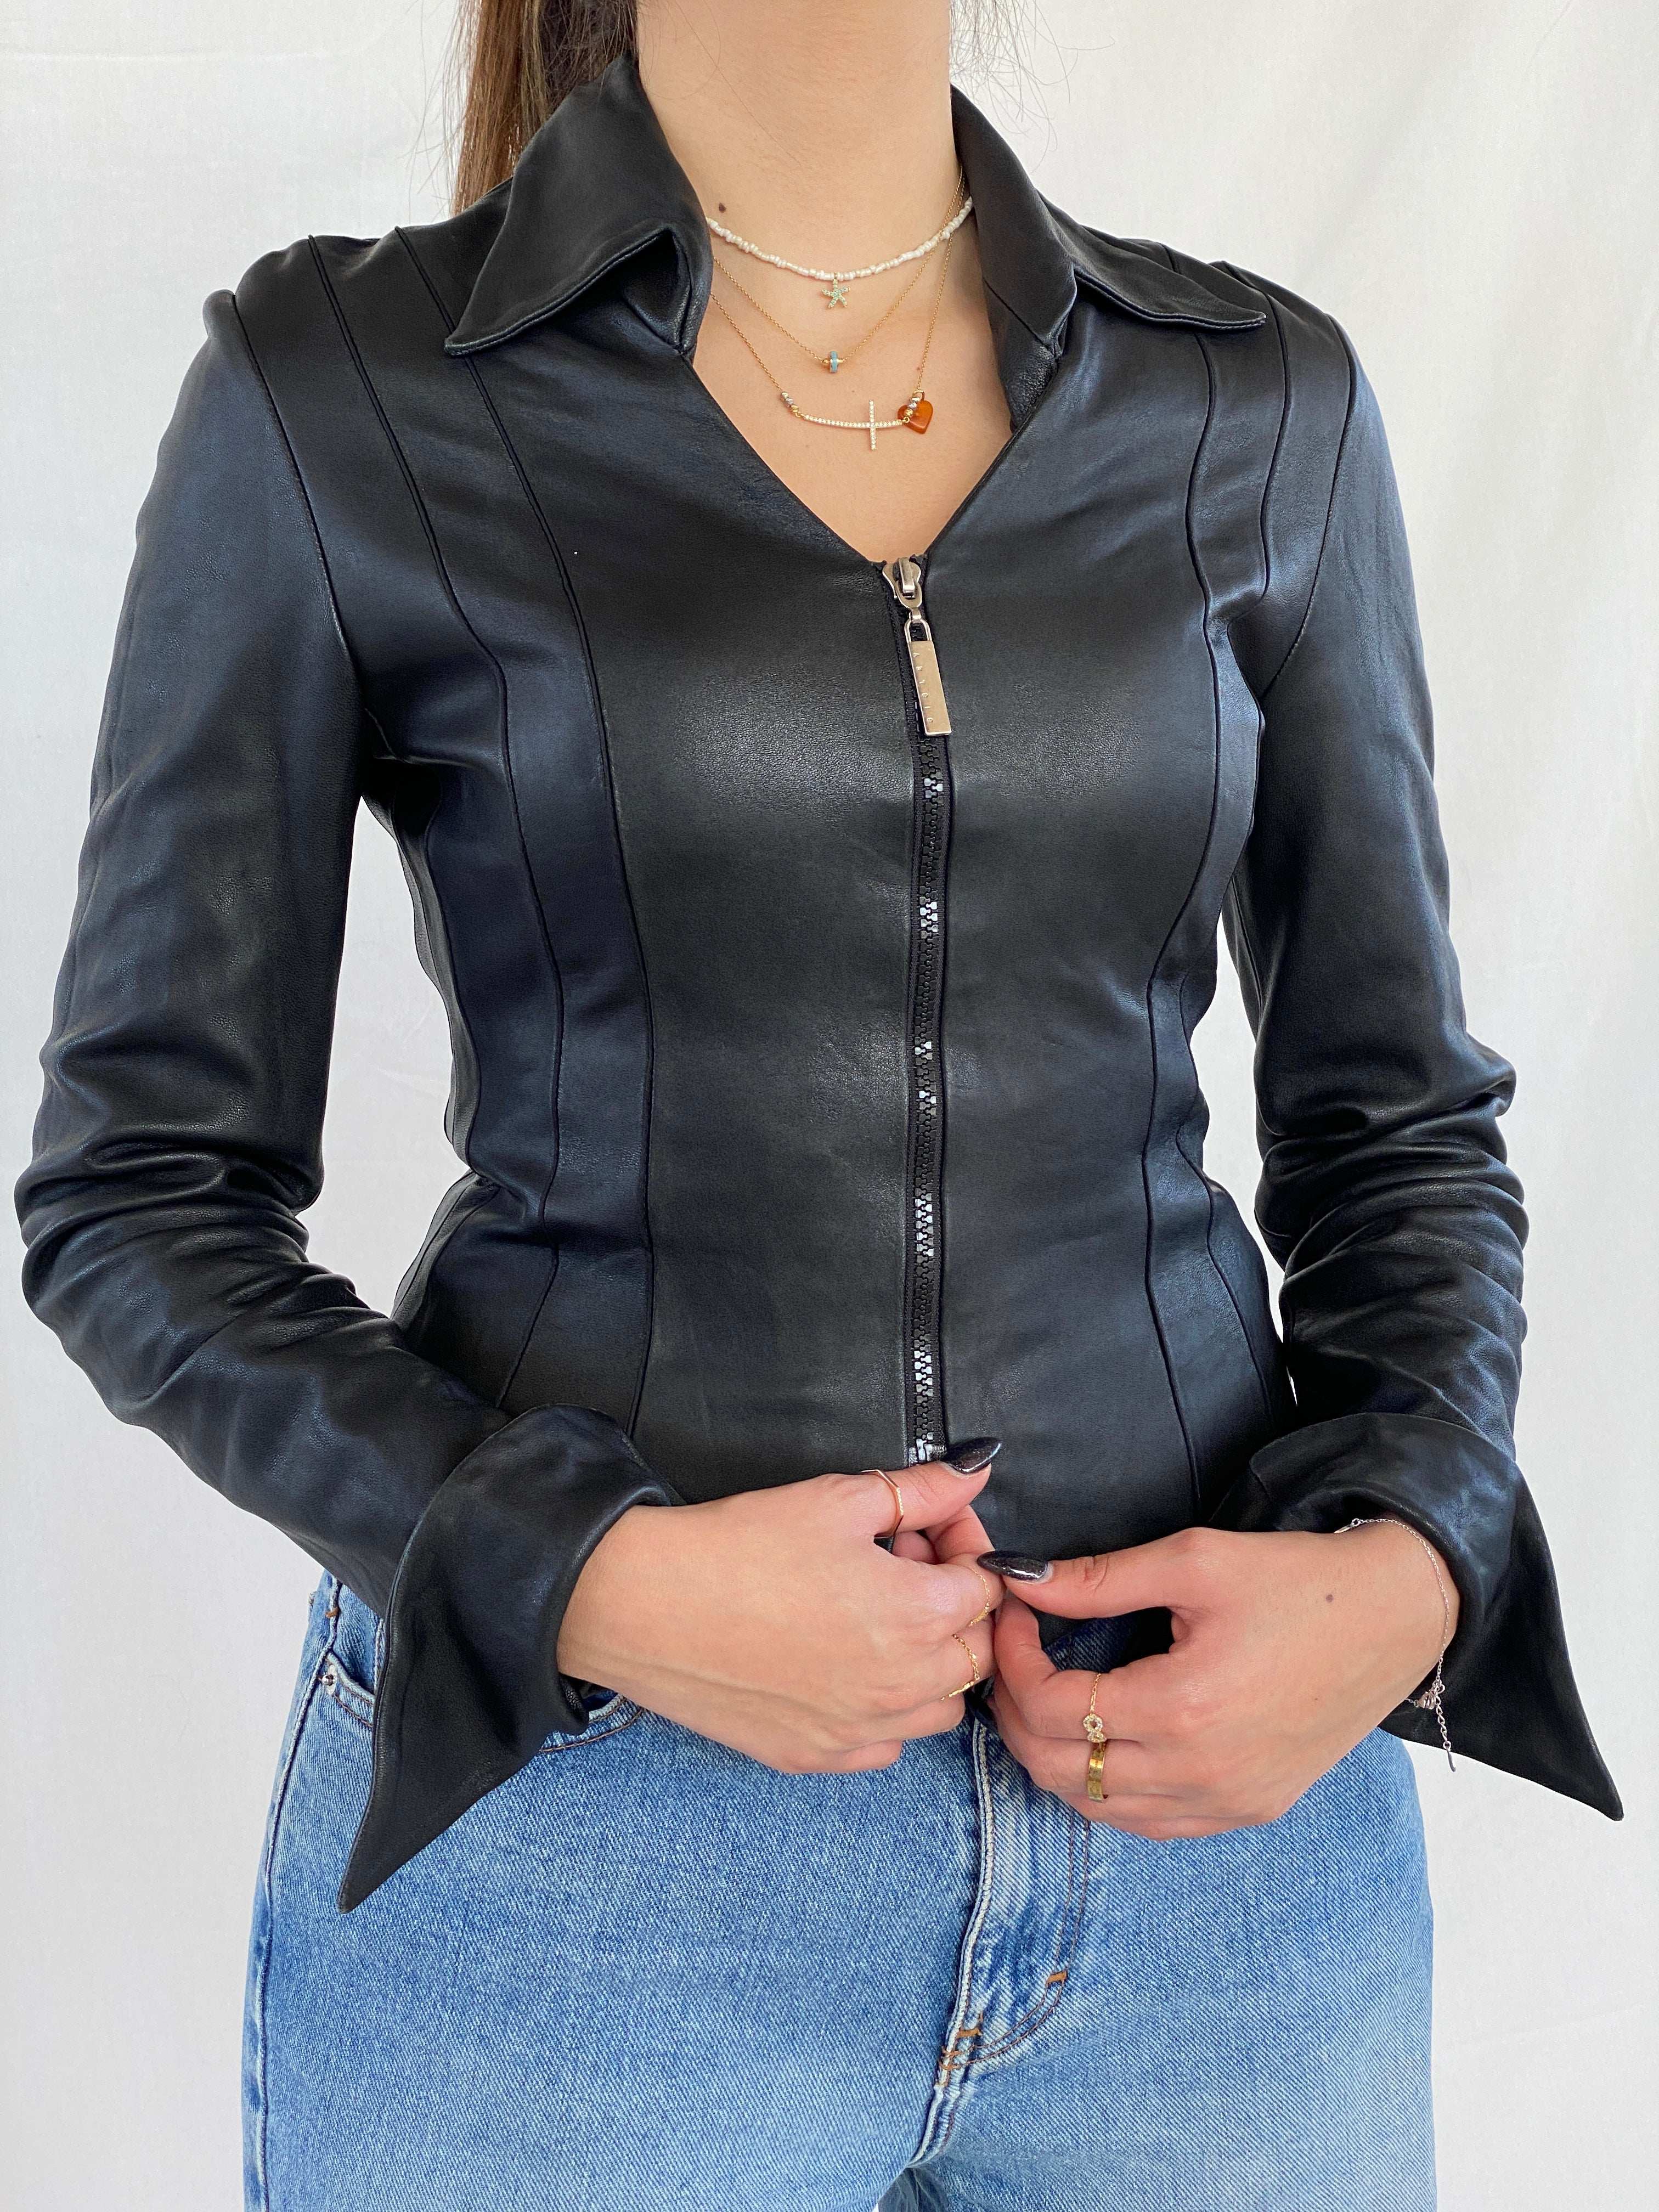 Vintage Fratti Genuine Leather Zip Up Top - Balagan Vintage Full Sleeve Top 00s, 90s, black leather, genuine leather, Juana, NEW IN